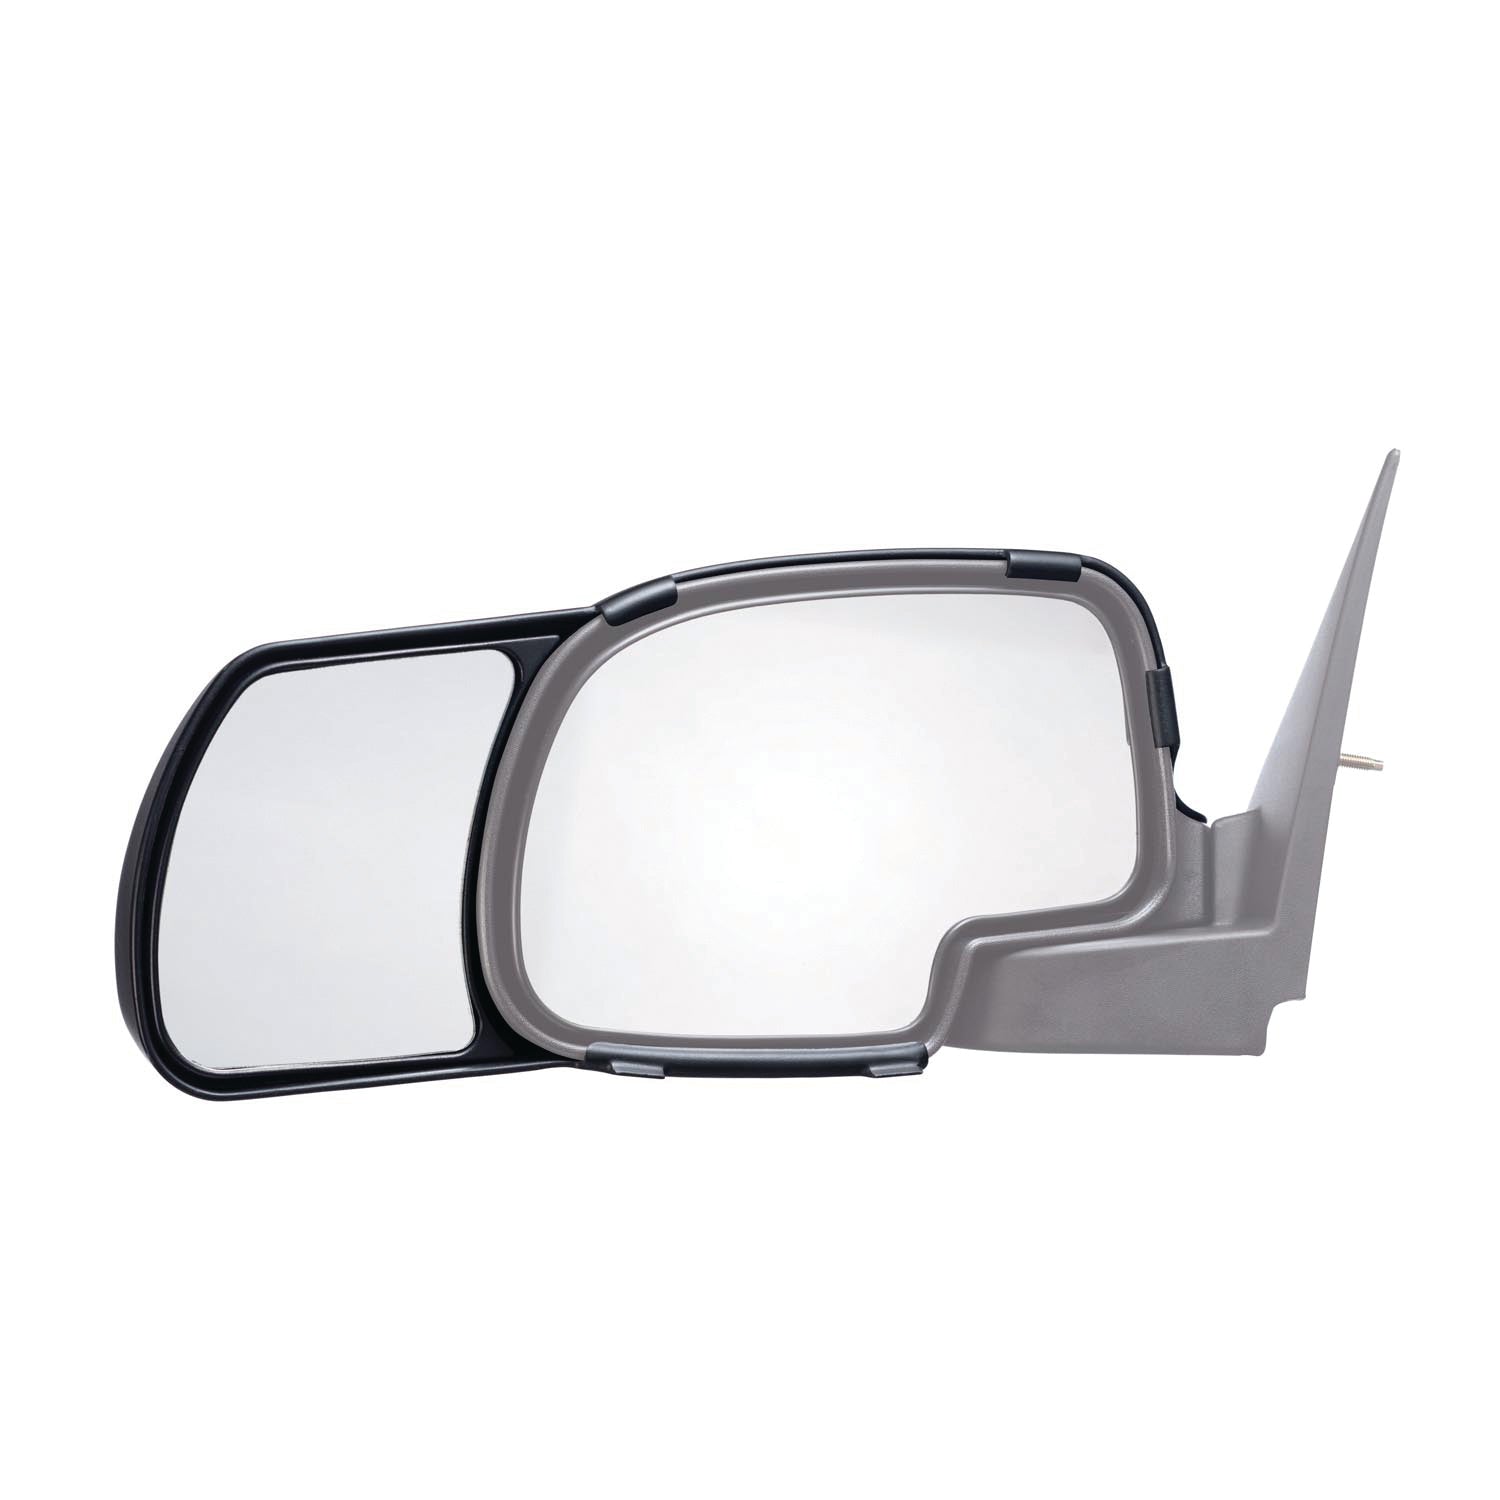 K-Source 80800 Snap-On Towing Mirrors For Select Chevy/GMC/Cadillac Models